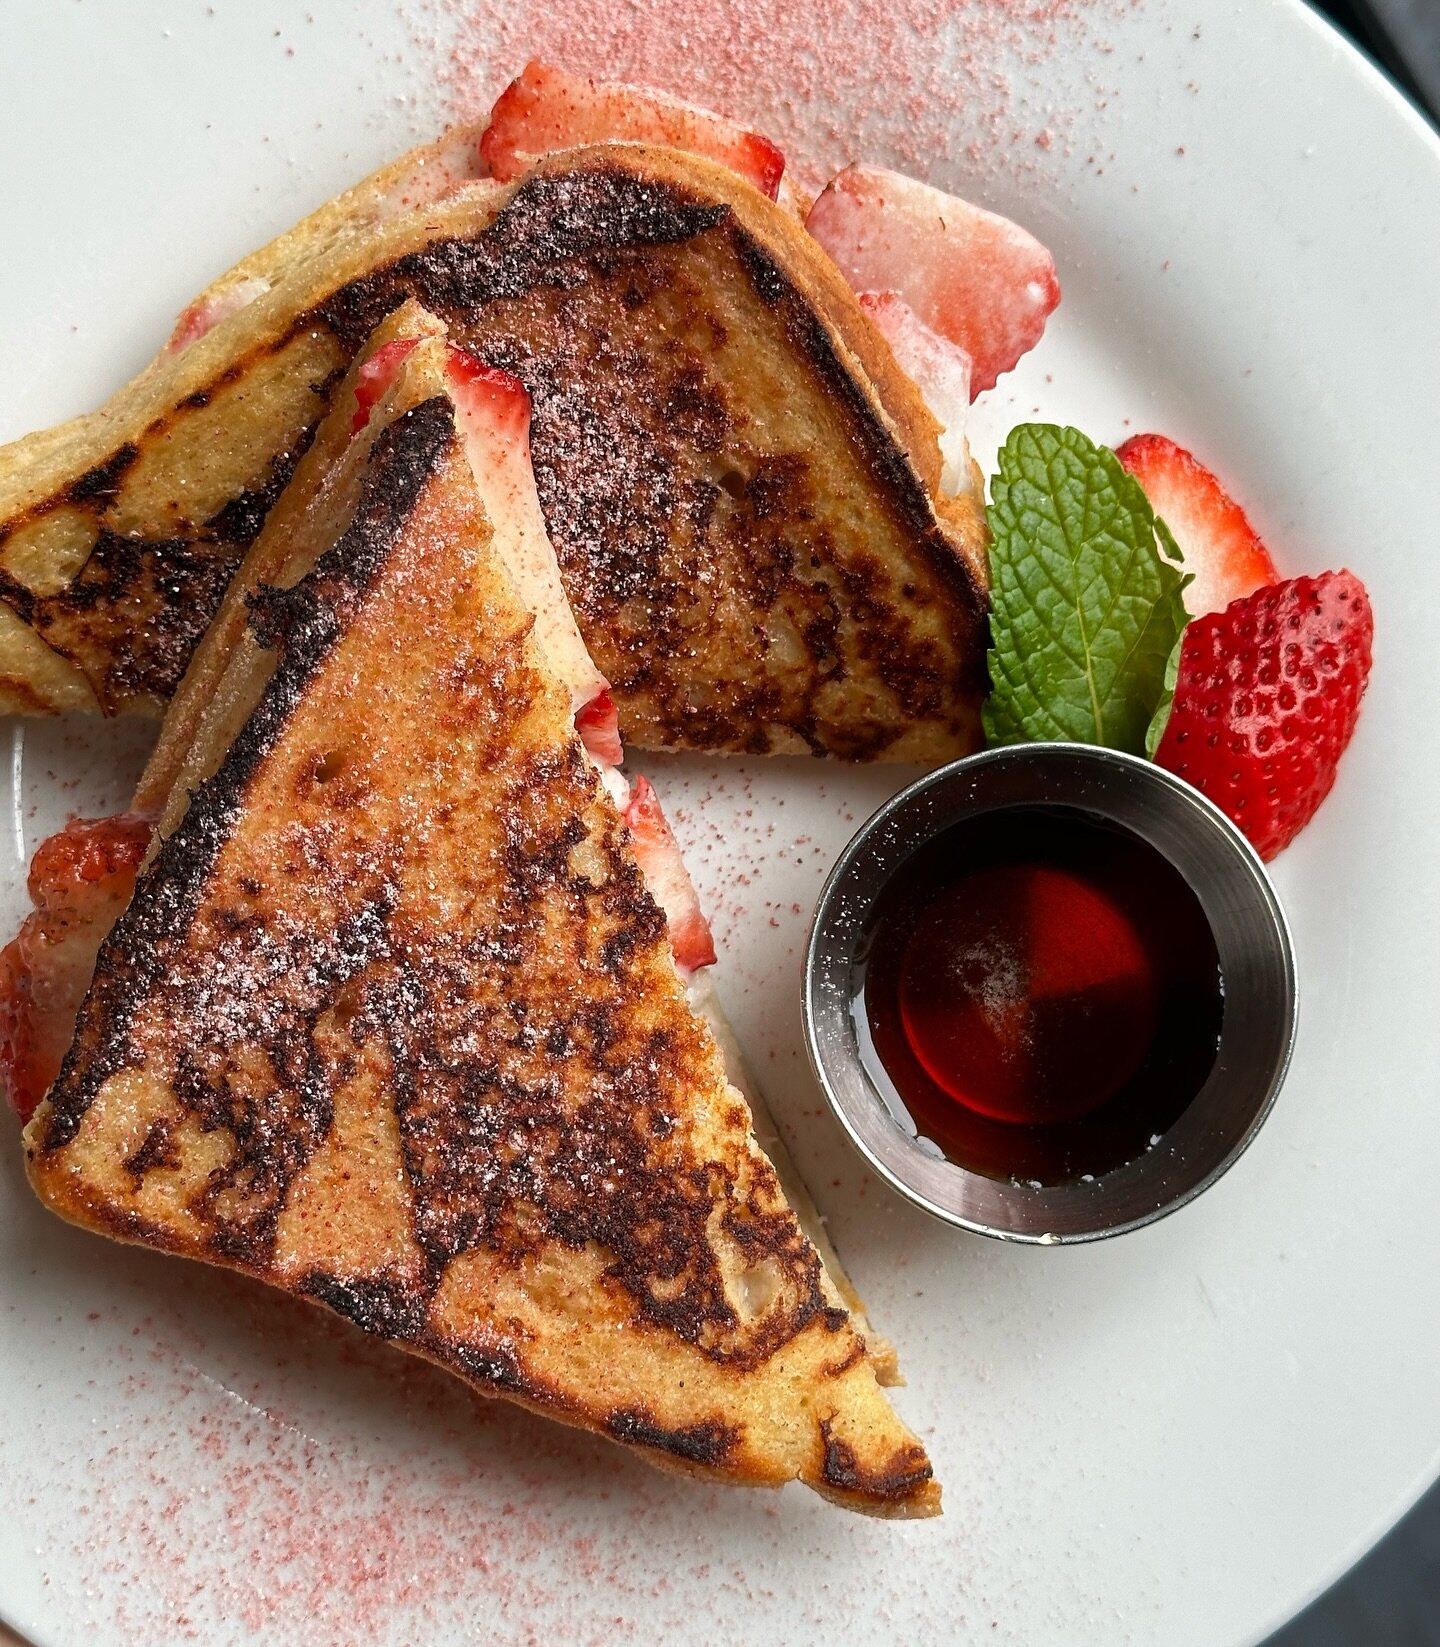 A special on a Friday ?!?😱😱
Strawberry cream cheese stuffed french toast dusted with strawberry sugar🍓